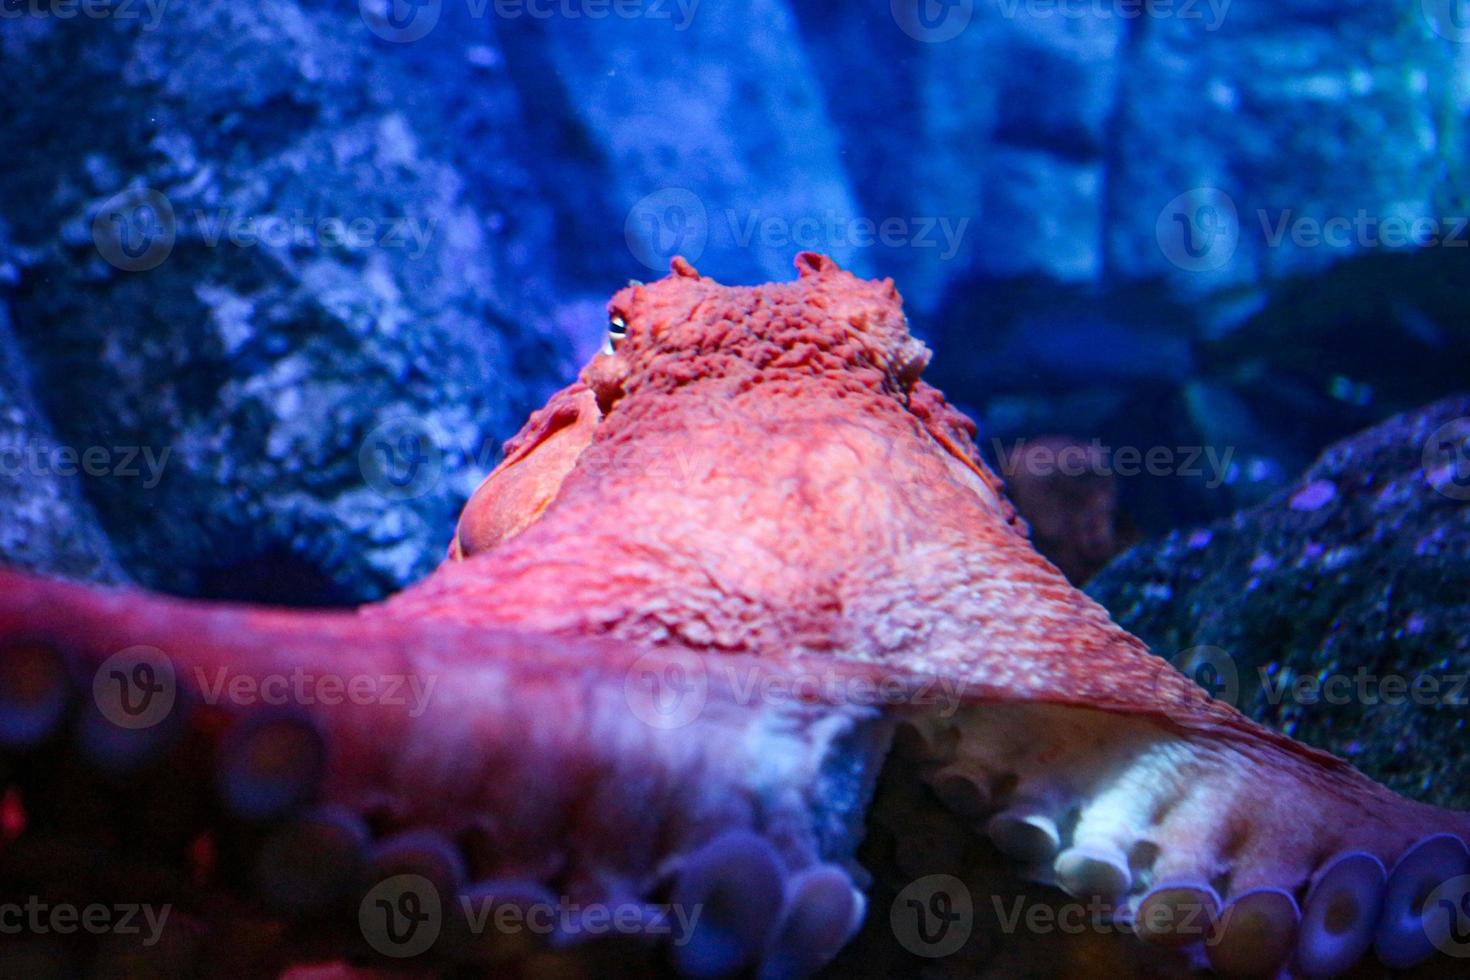 Octopus up close and personal photo